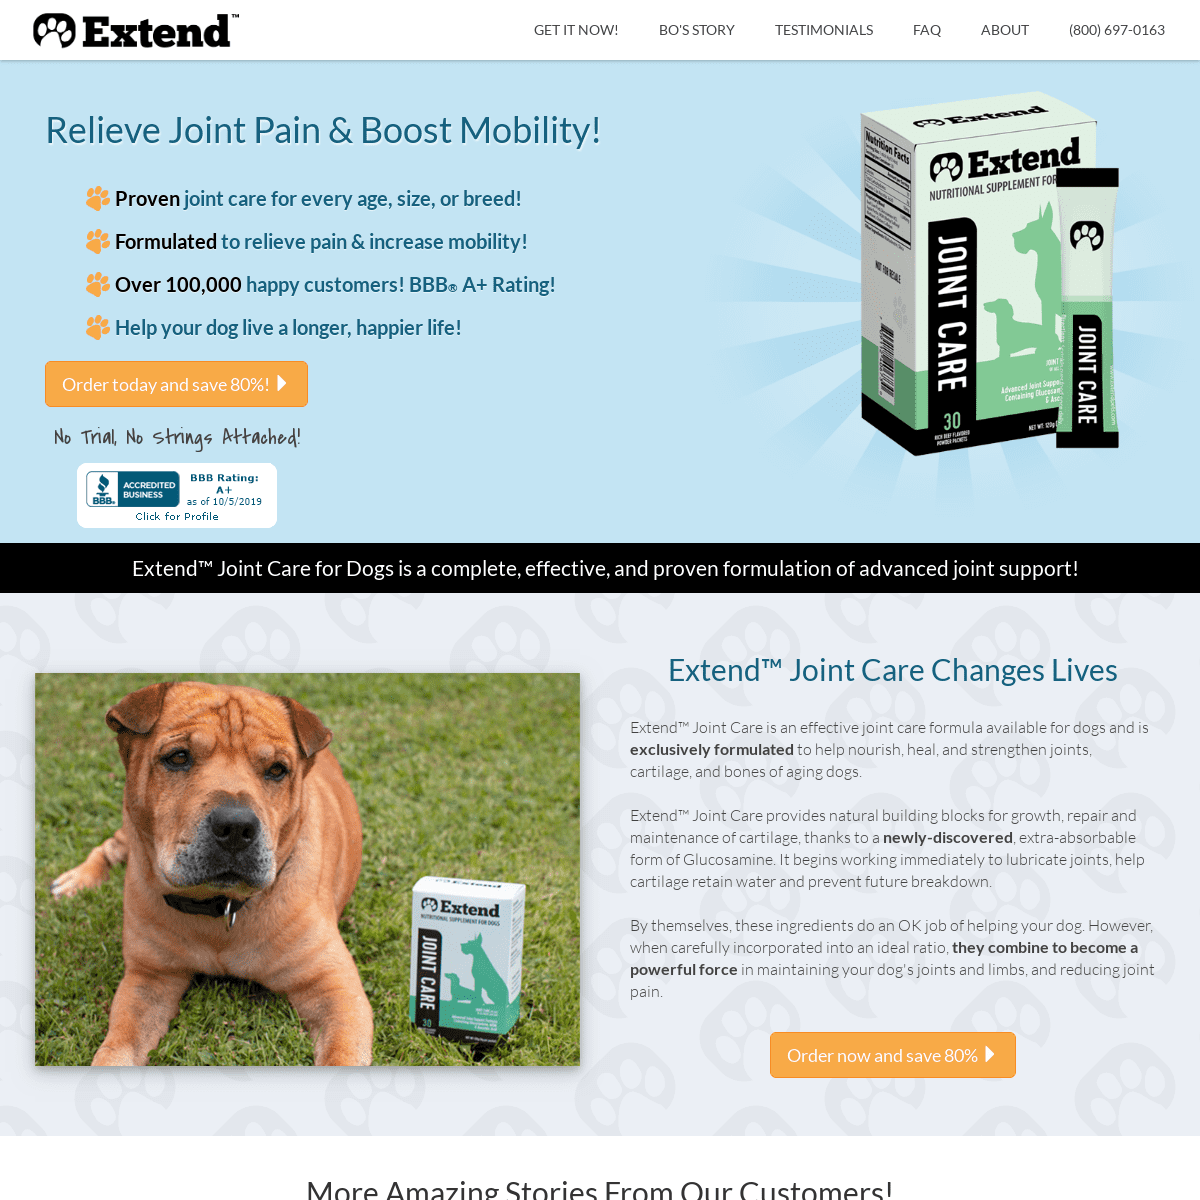 A complete backup of extendpets.com